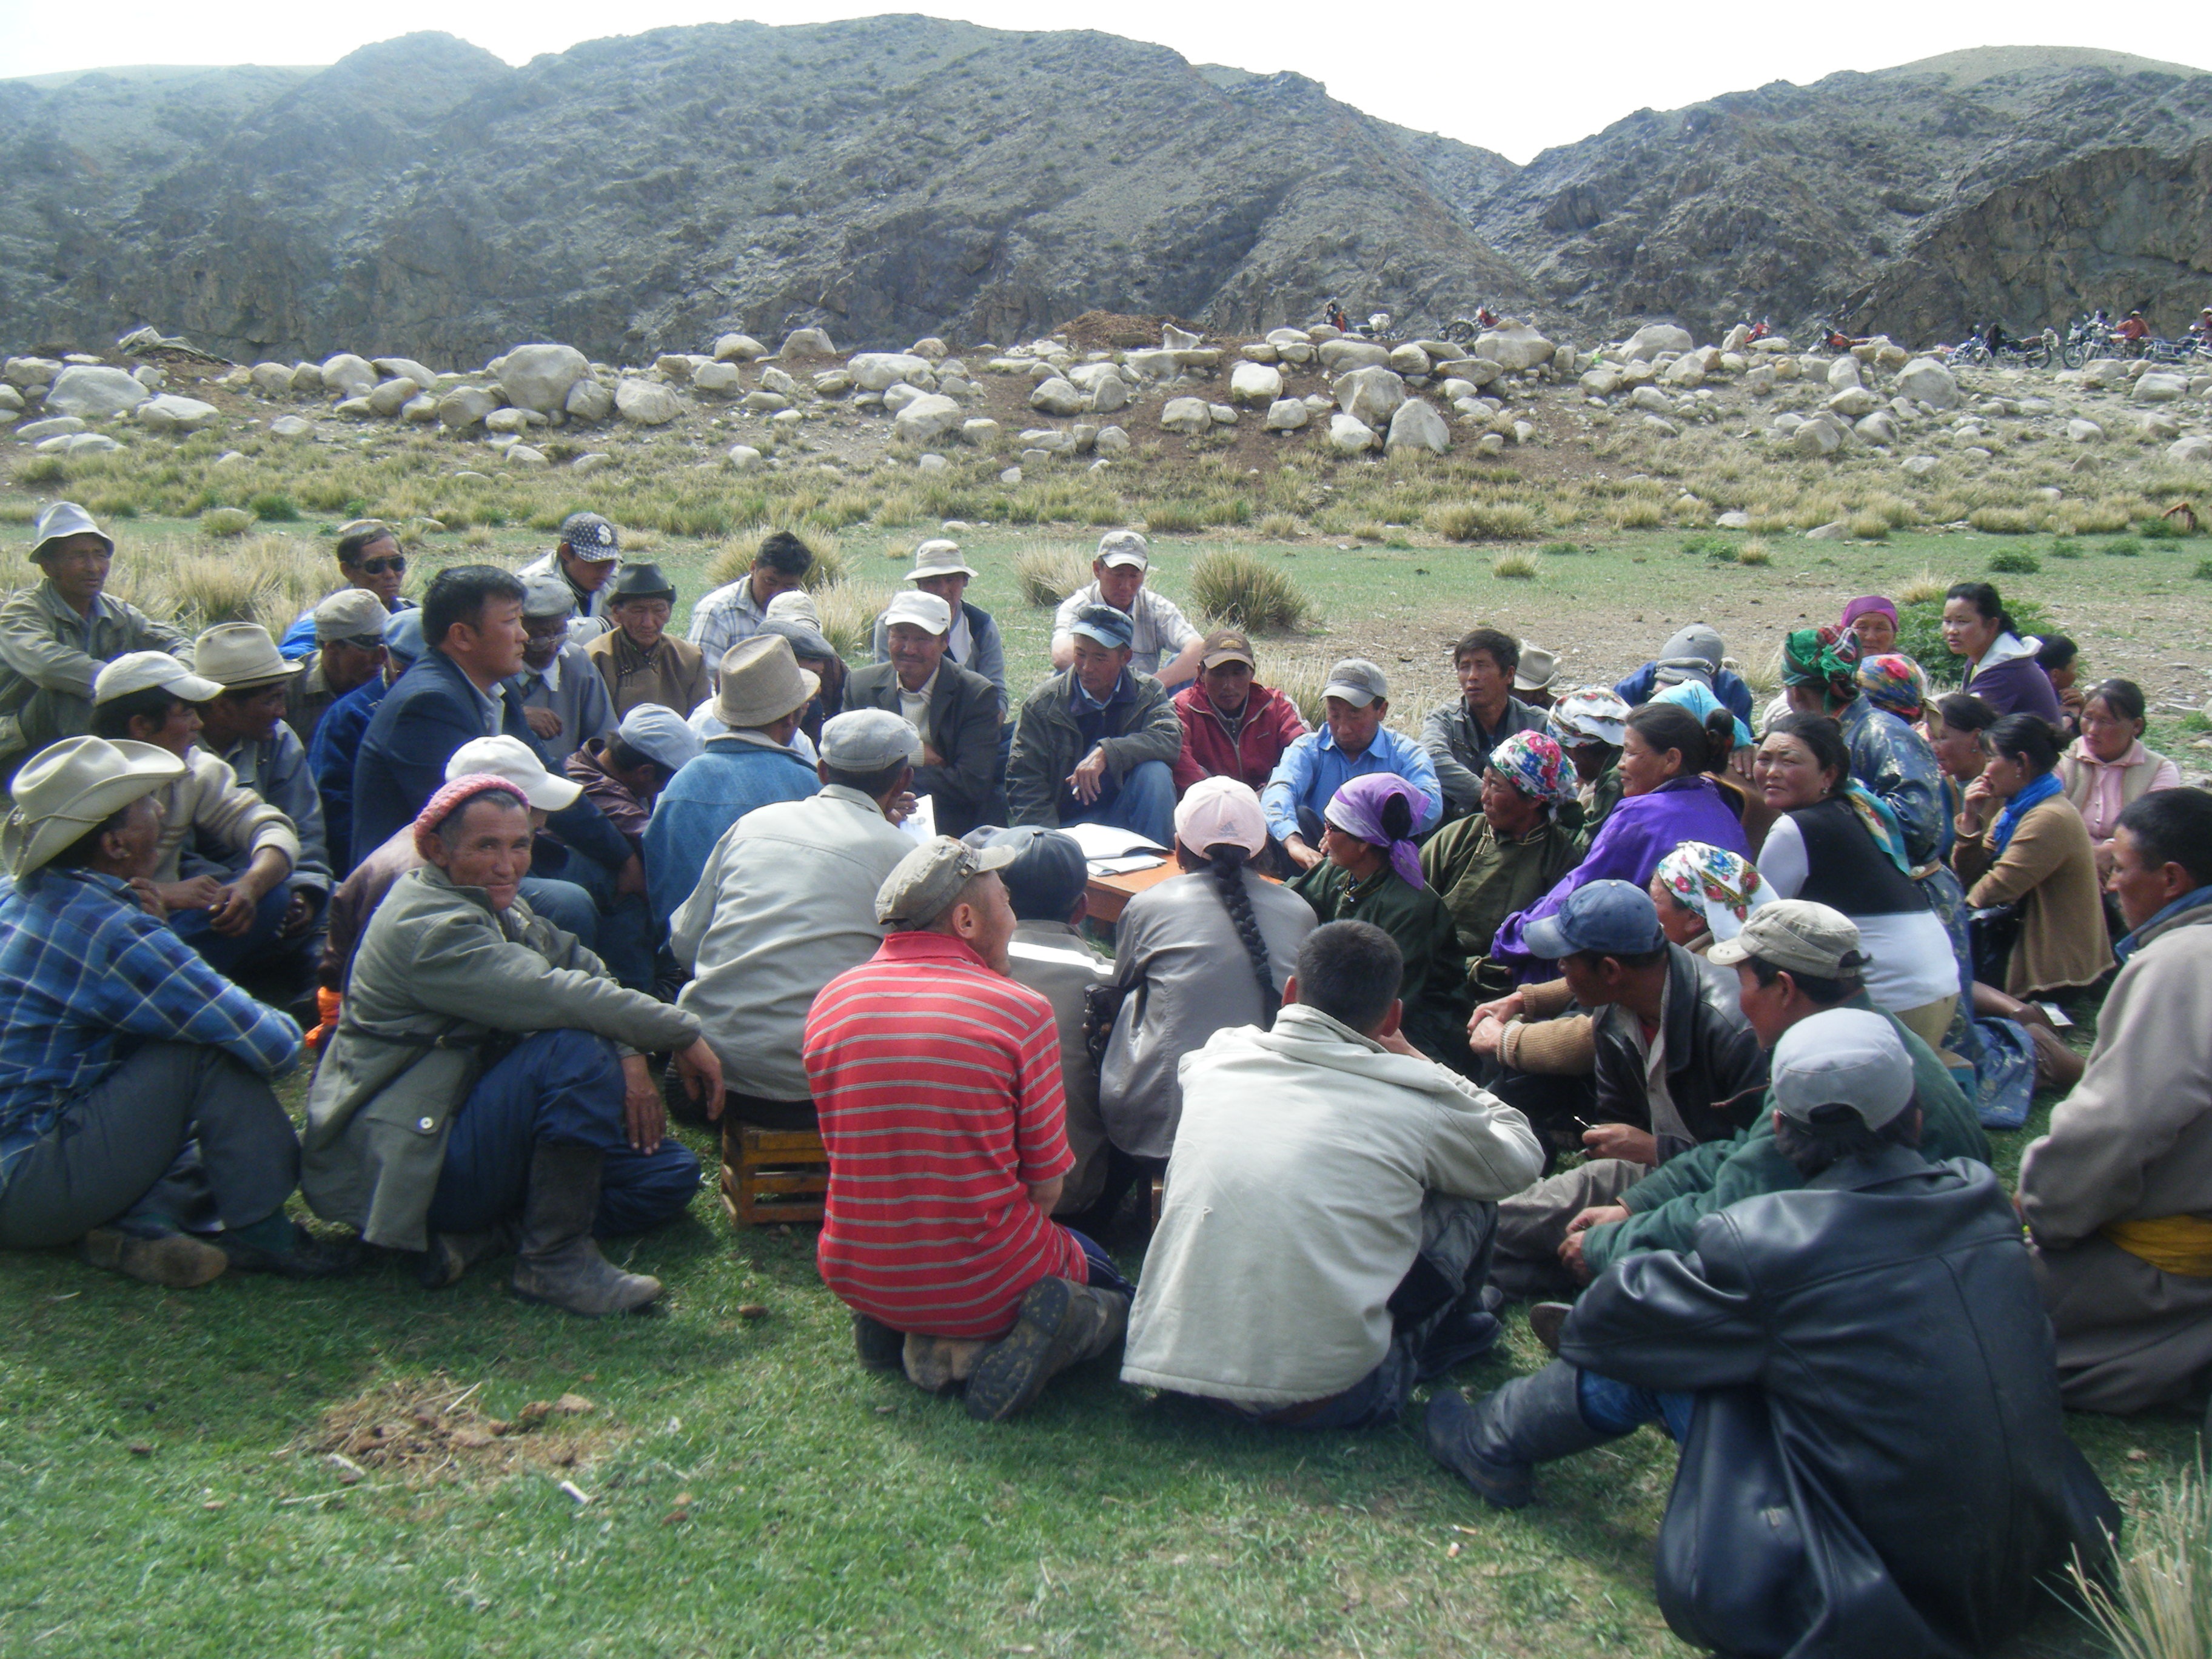 Group of herders sitting on the grass, engaged in discussion.